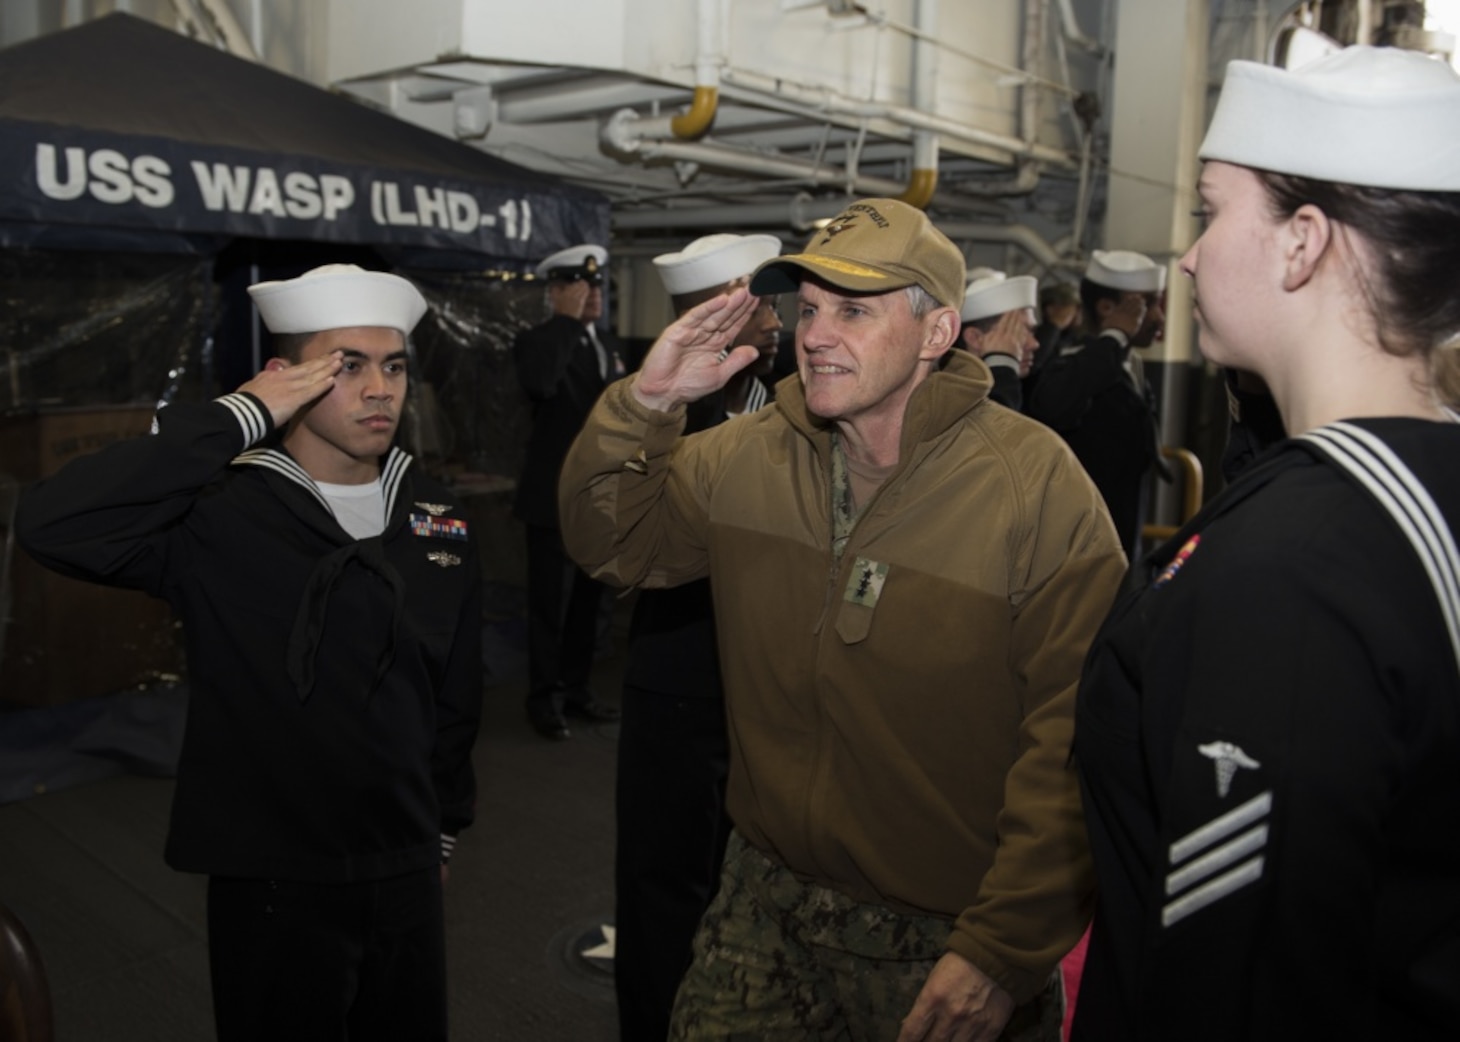 SASEBO, Japan (Jan. 9, 2018) Vice Adm. Phil Sawyer, commander of U.S. 7th Fleet, visits the crew of the amphibious assault ship USS Wasp (LHD 1) during a waterfront visit to forward deployed naval forces operating out of Fleet Activities Sasebo, Japan. Sawyer made the visit to Sasebo to thank the crews for their hard work as well as hear directly from the crews operating in the 7th Fleet.